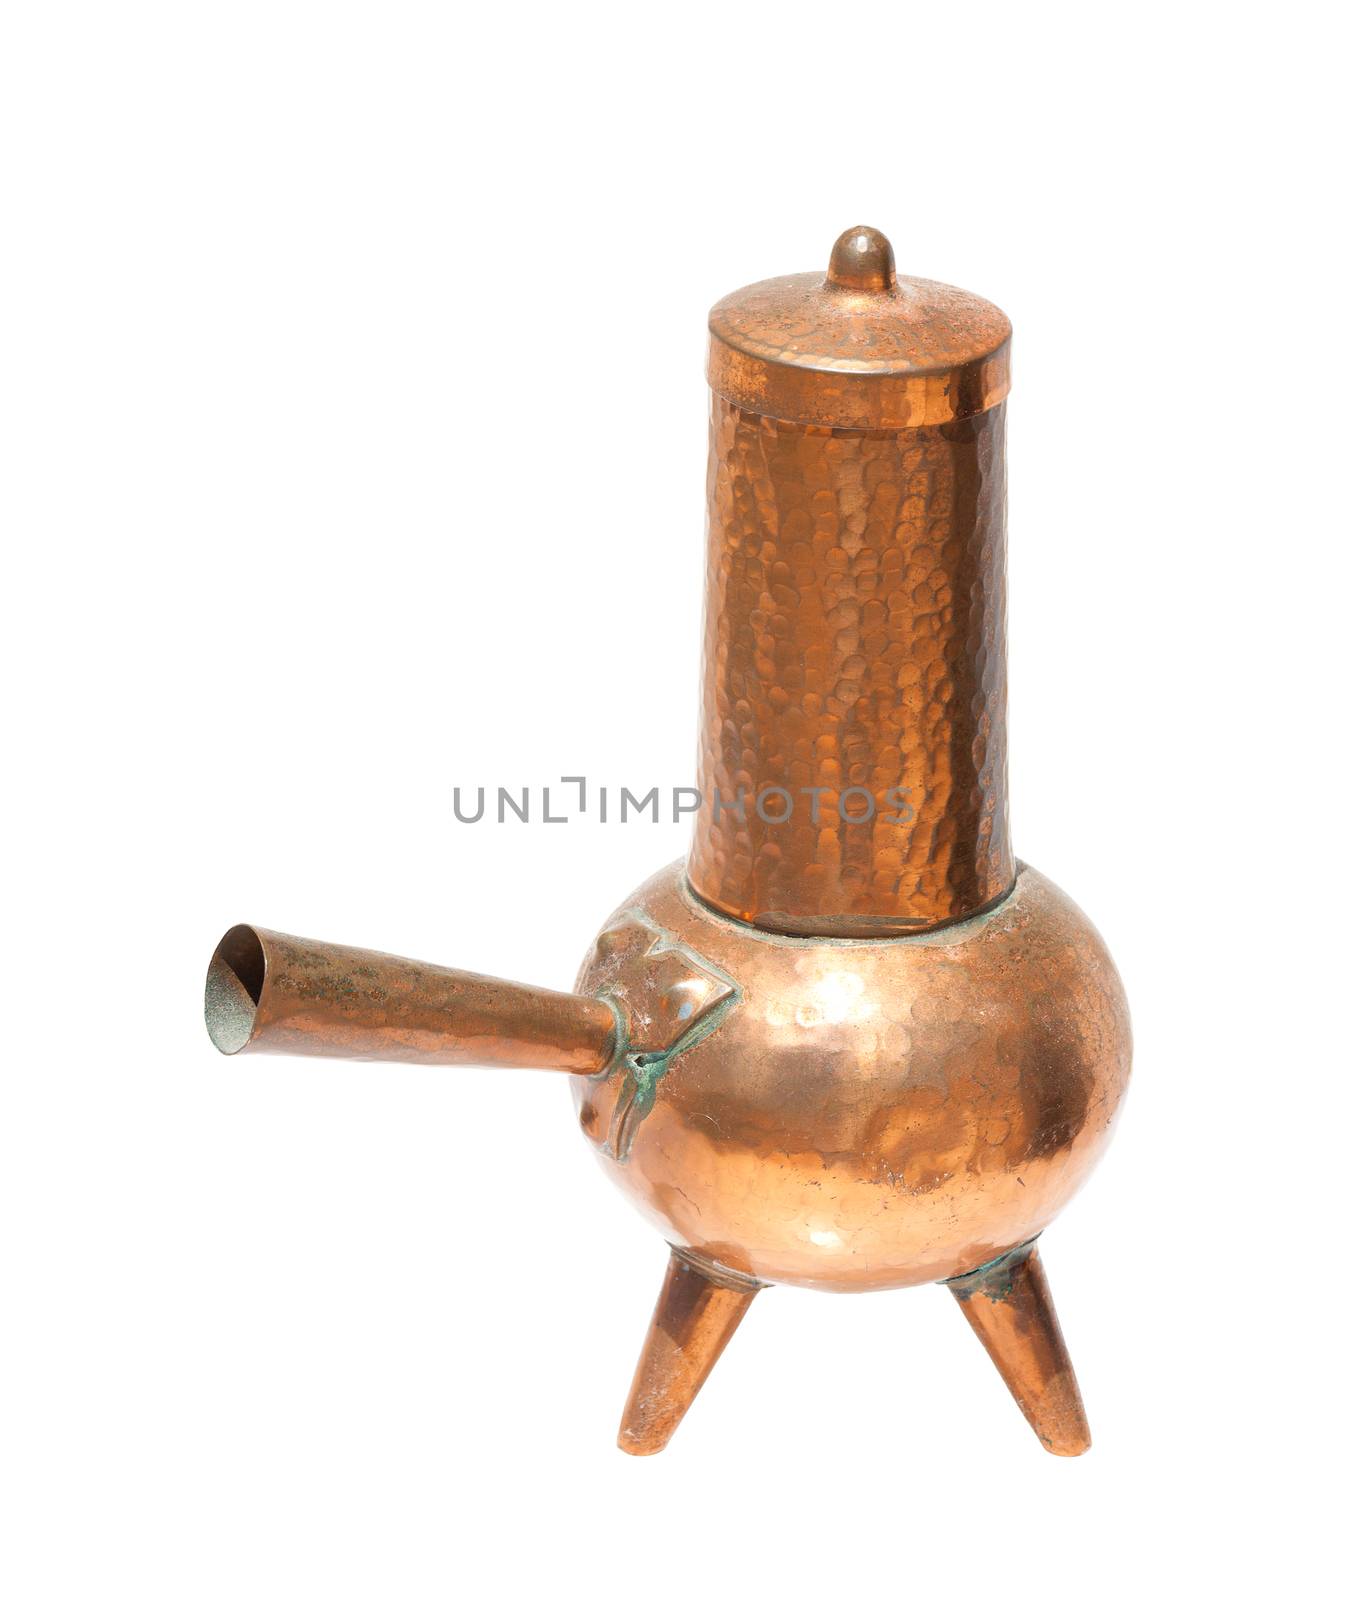 Antique copper coffeepot by Discovod